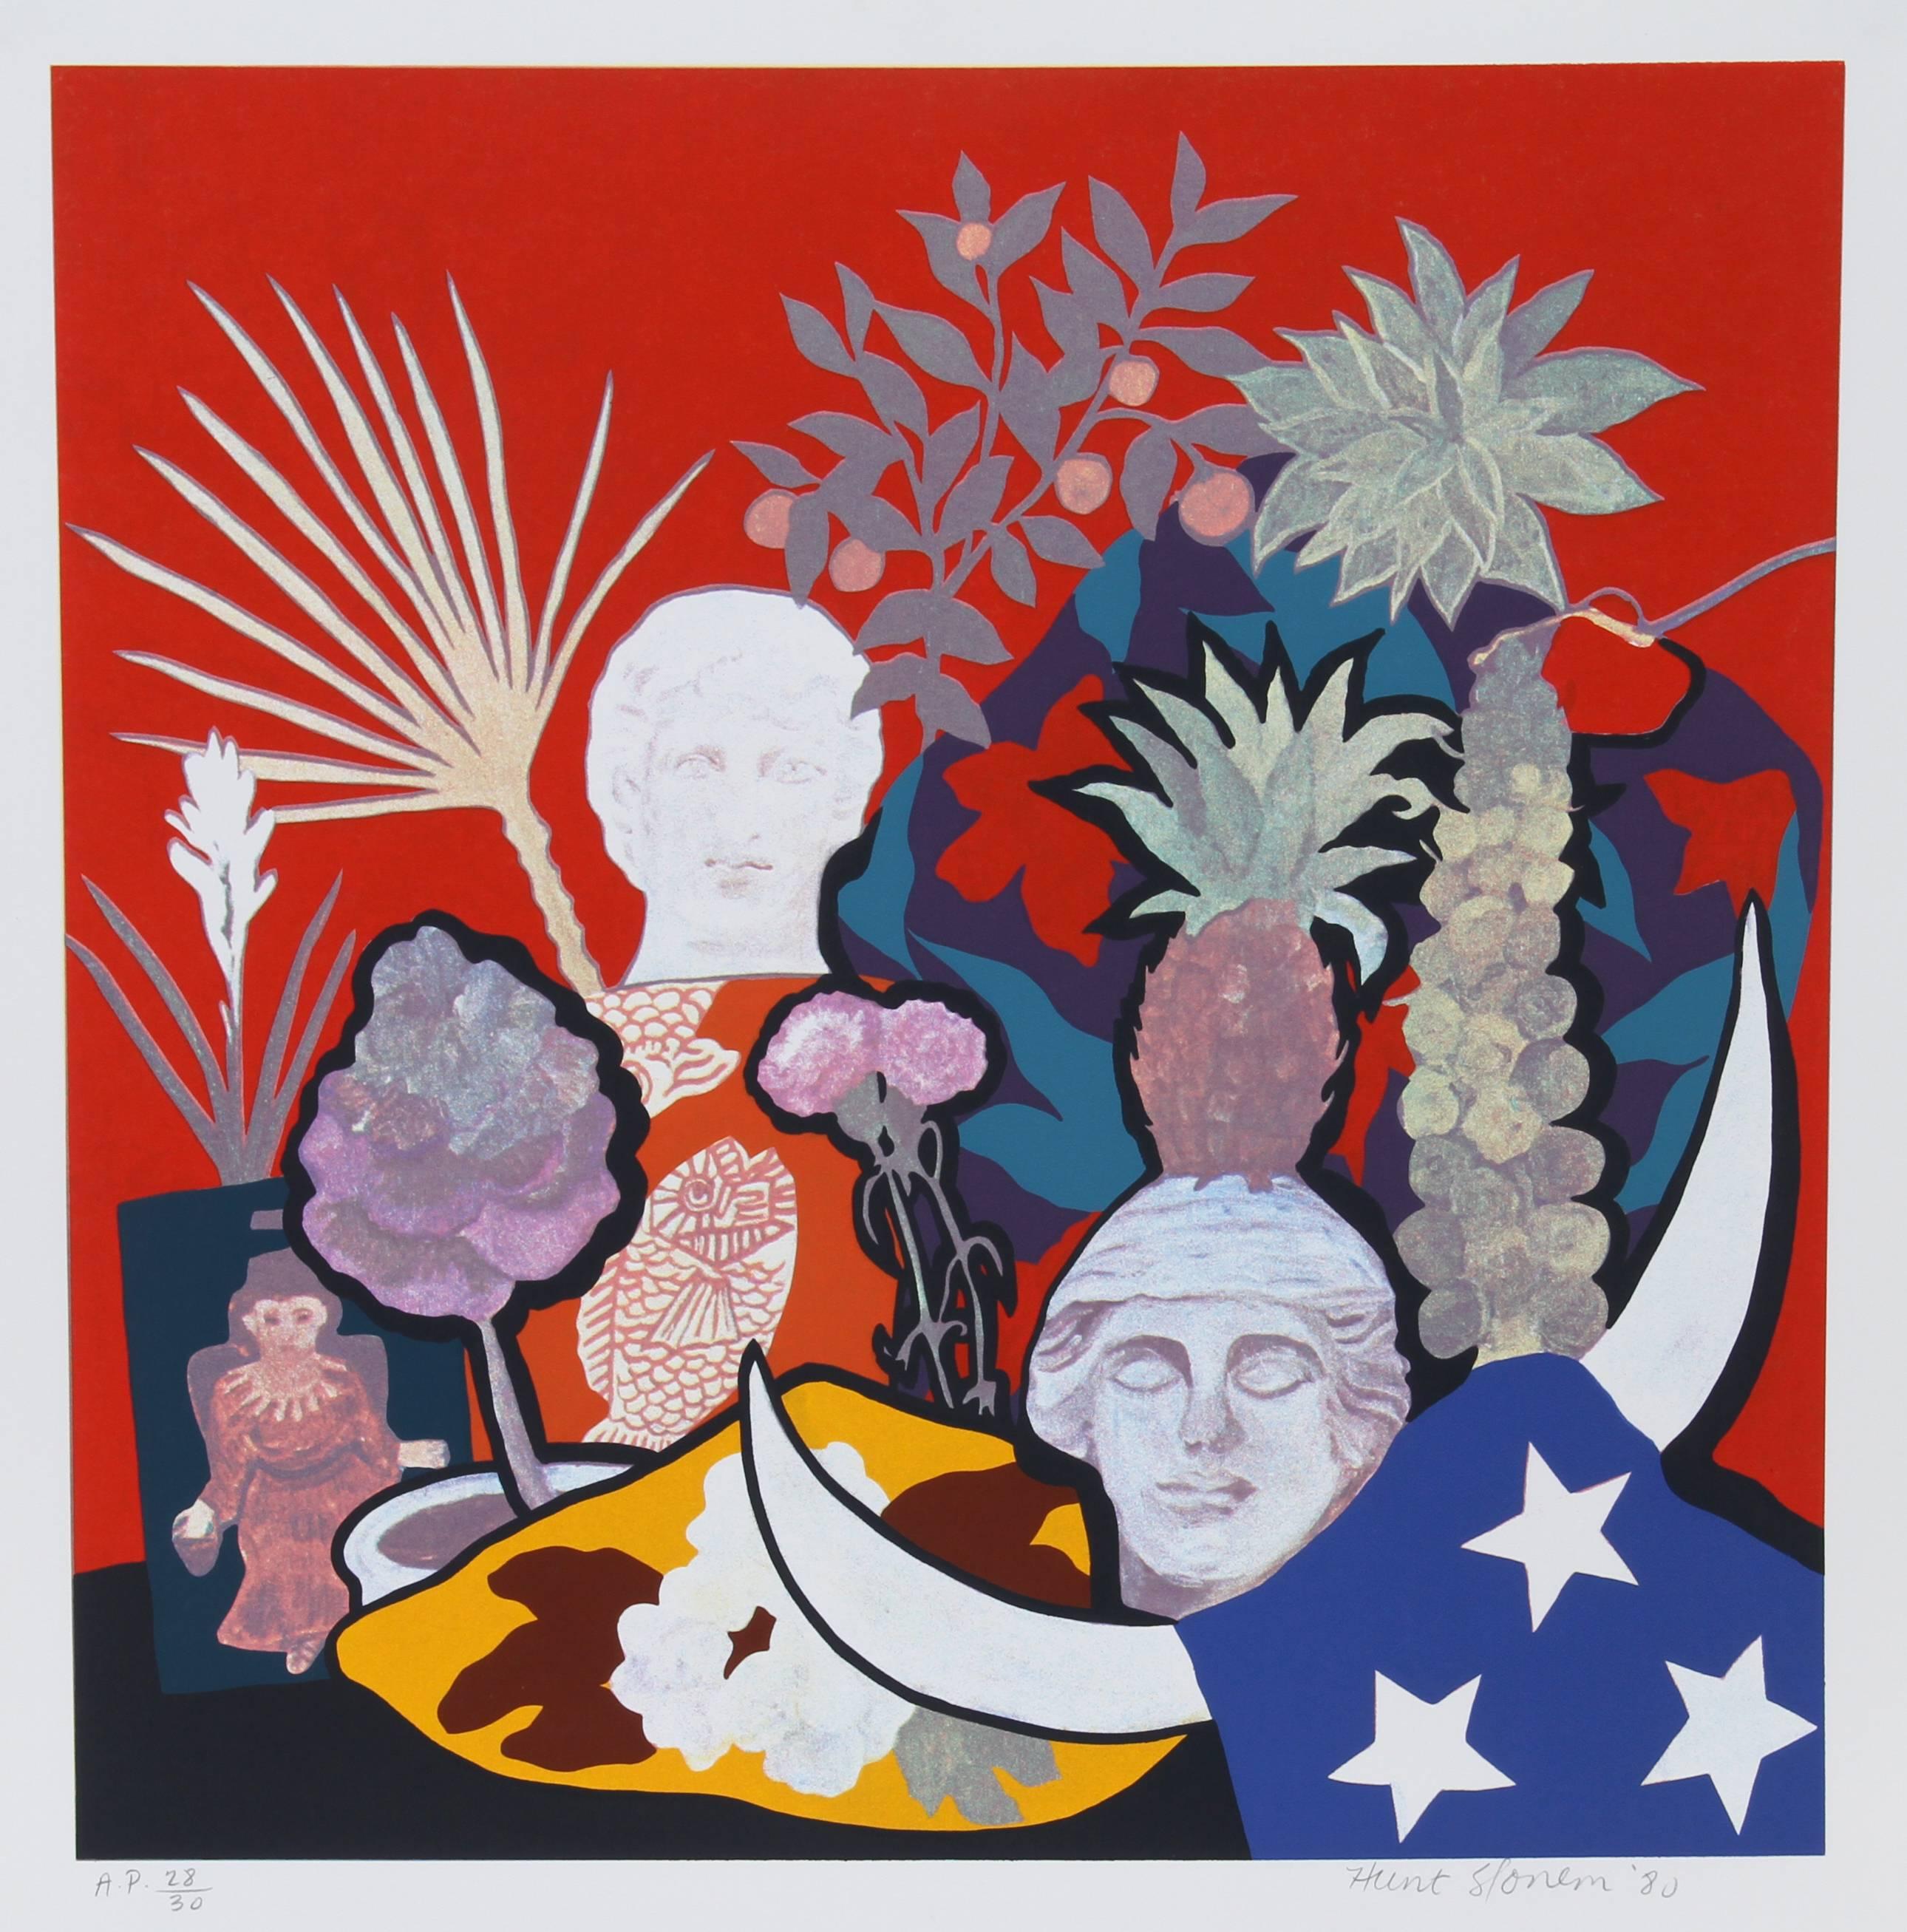 Artist:  Hunt Slonem, American (1951 - )
Title:  Horns Of Plenty
Year:  1980
Medium:  Serigraph, signed and numbered in pencil
Edition:  AP 30
Image Size:  24 x 23.5 inches
Size:  28 in. x 26 in. (71.12 cm x 66.04 cm)